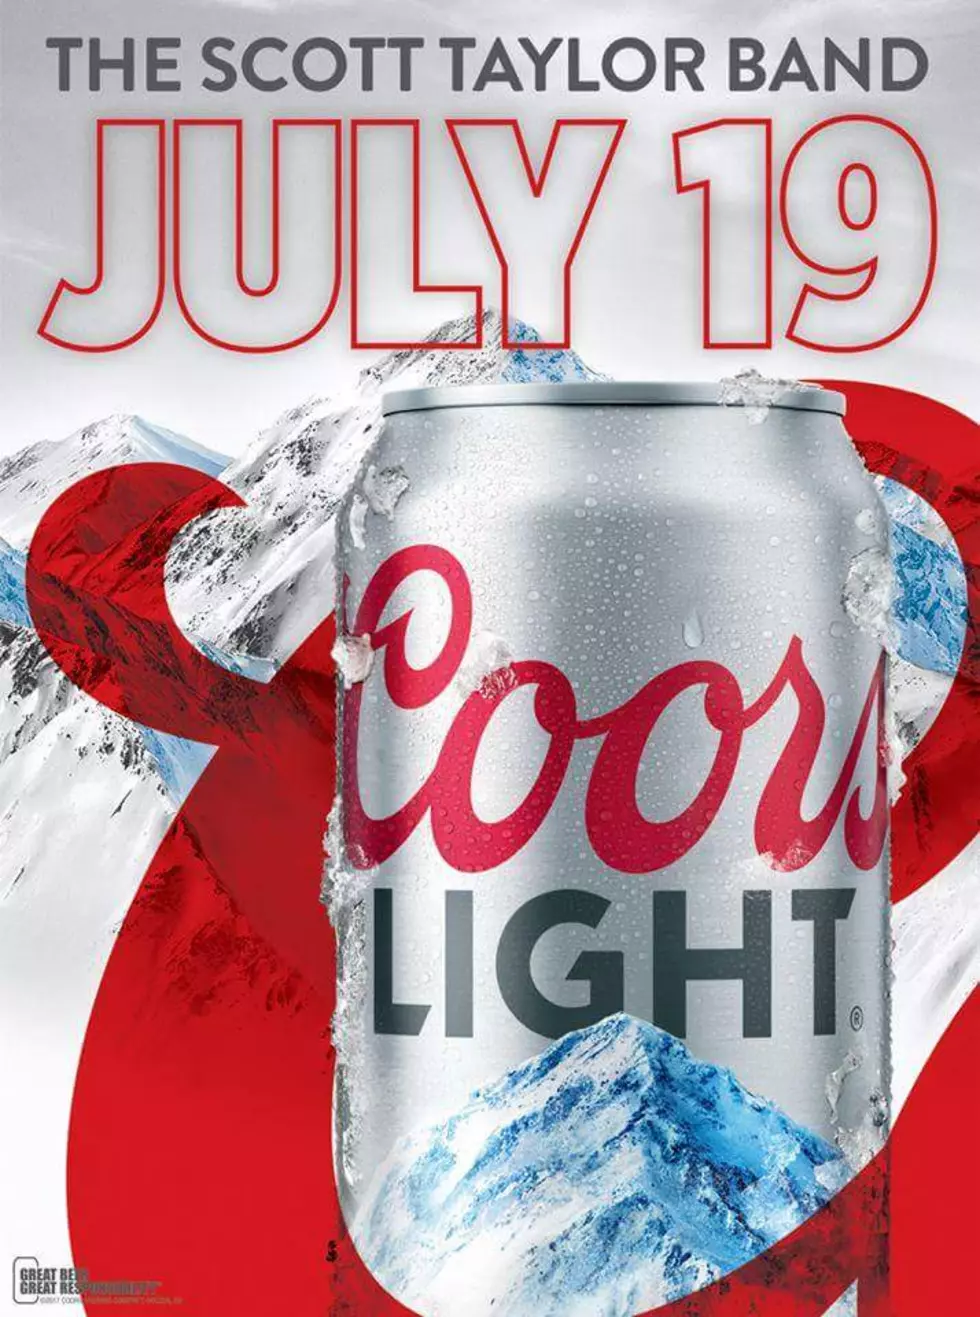 Come Party With Us at the Coors Light Summer Street Dance Tonight!